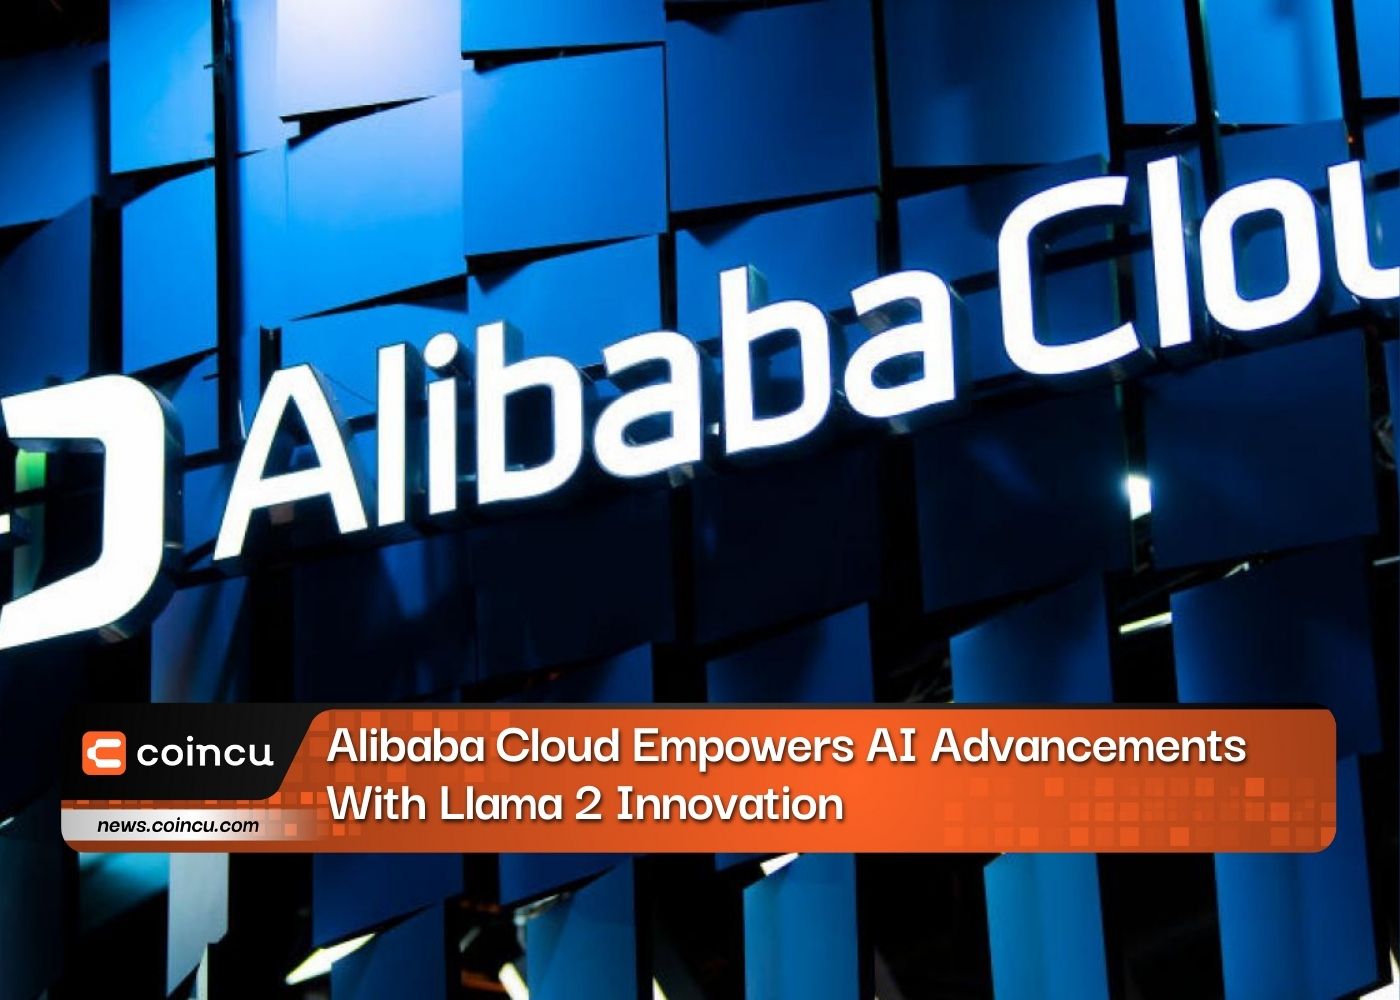 Alibaba Cloud Empowers AI Advancements With Llama 2 Innovation